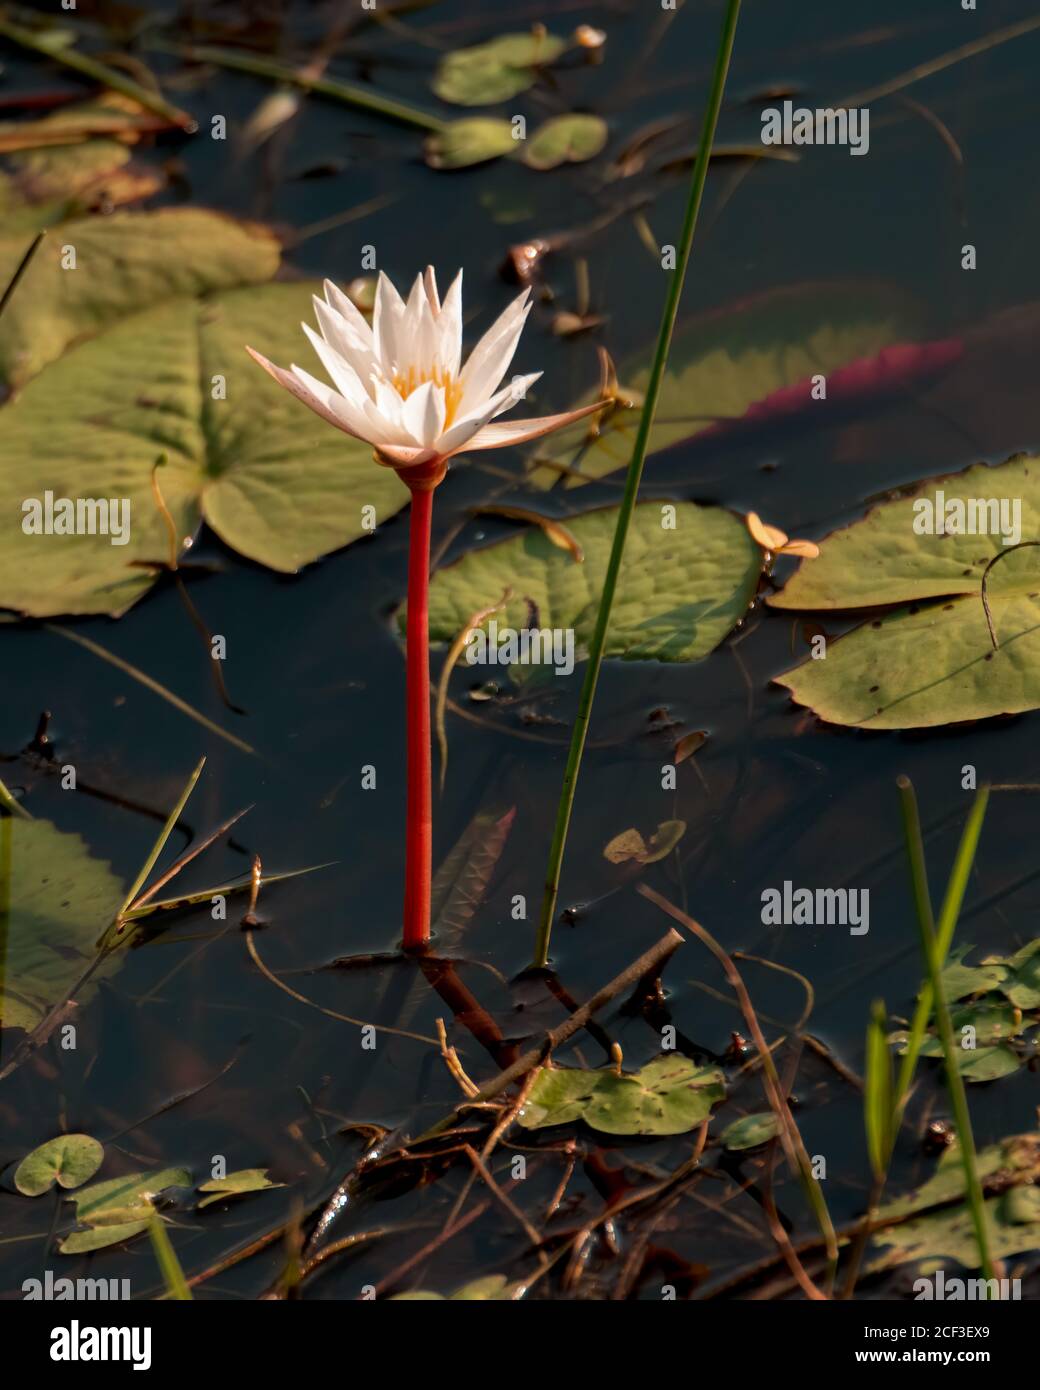 A single beautiful white water lily in full bloom and with a long red stem, in a pond. Stock Photo